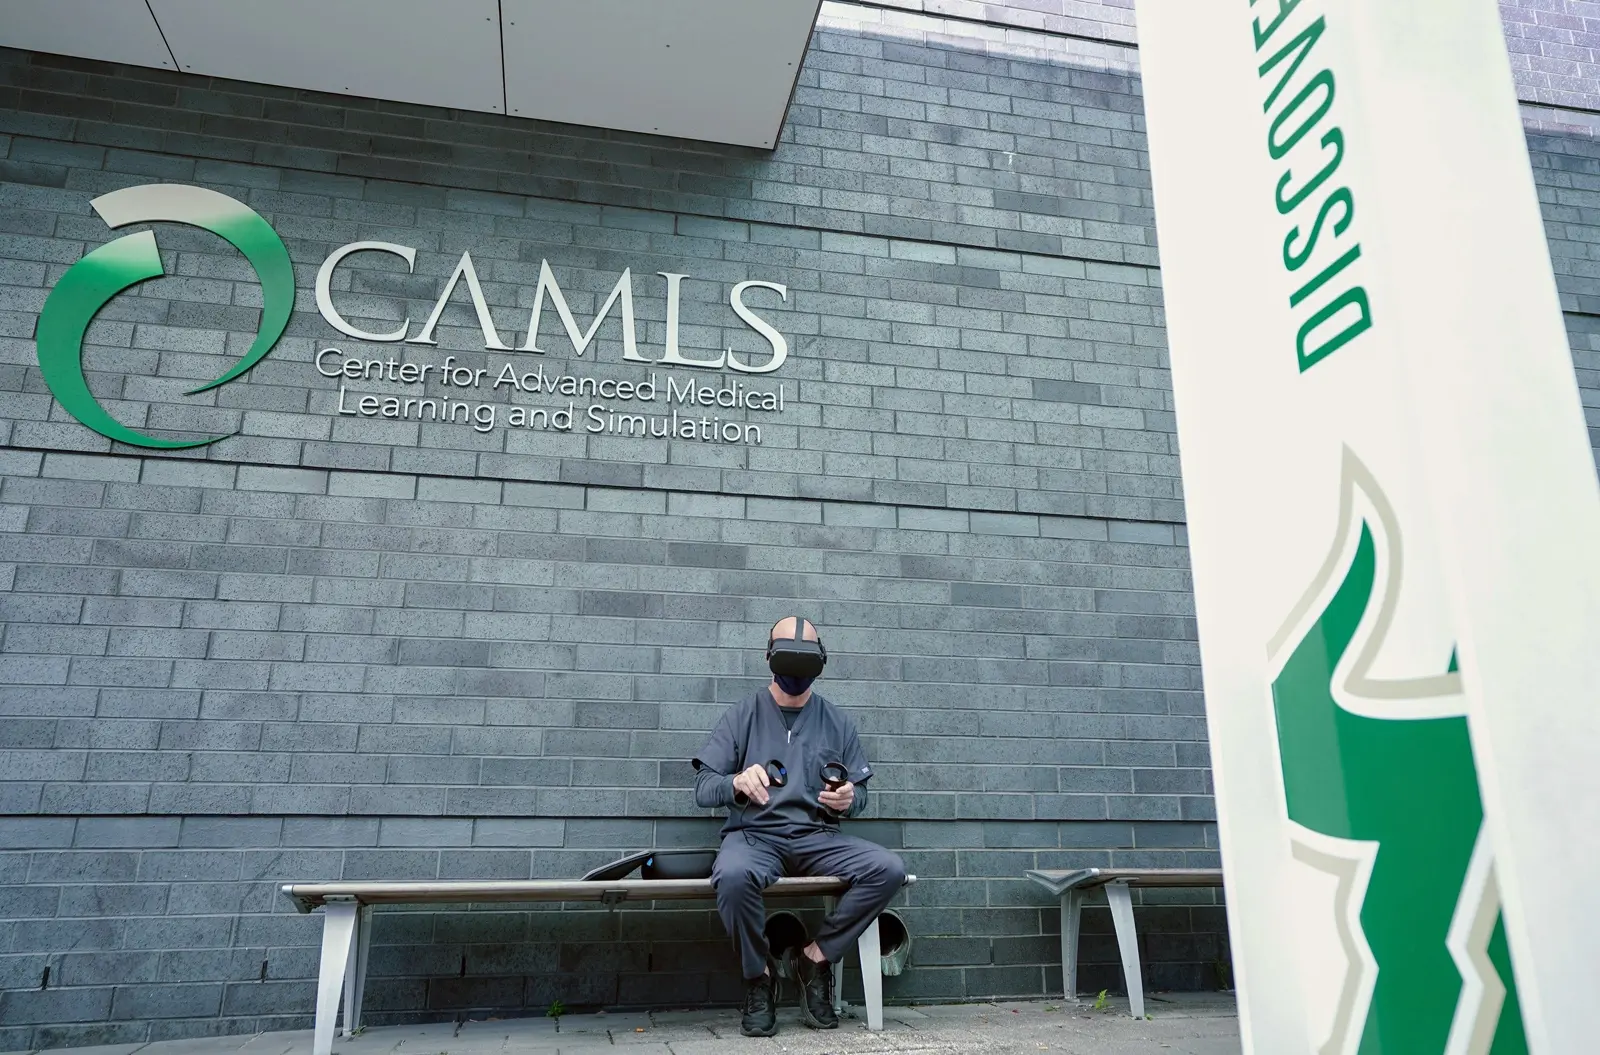 CAMLS A person wearing a virtual reality headset sits on a bench outside the CAMLS (Center for Advanced Medical Learning and Simulation) building. The individual holds a tablet, and a vertical banner with "DISCOVE" is partially visible on the right side of the image.